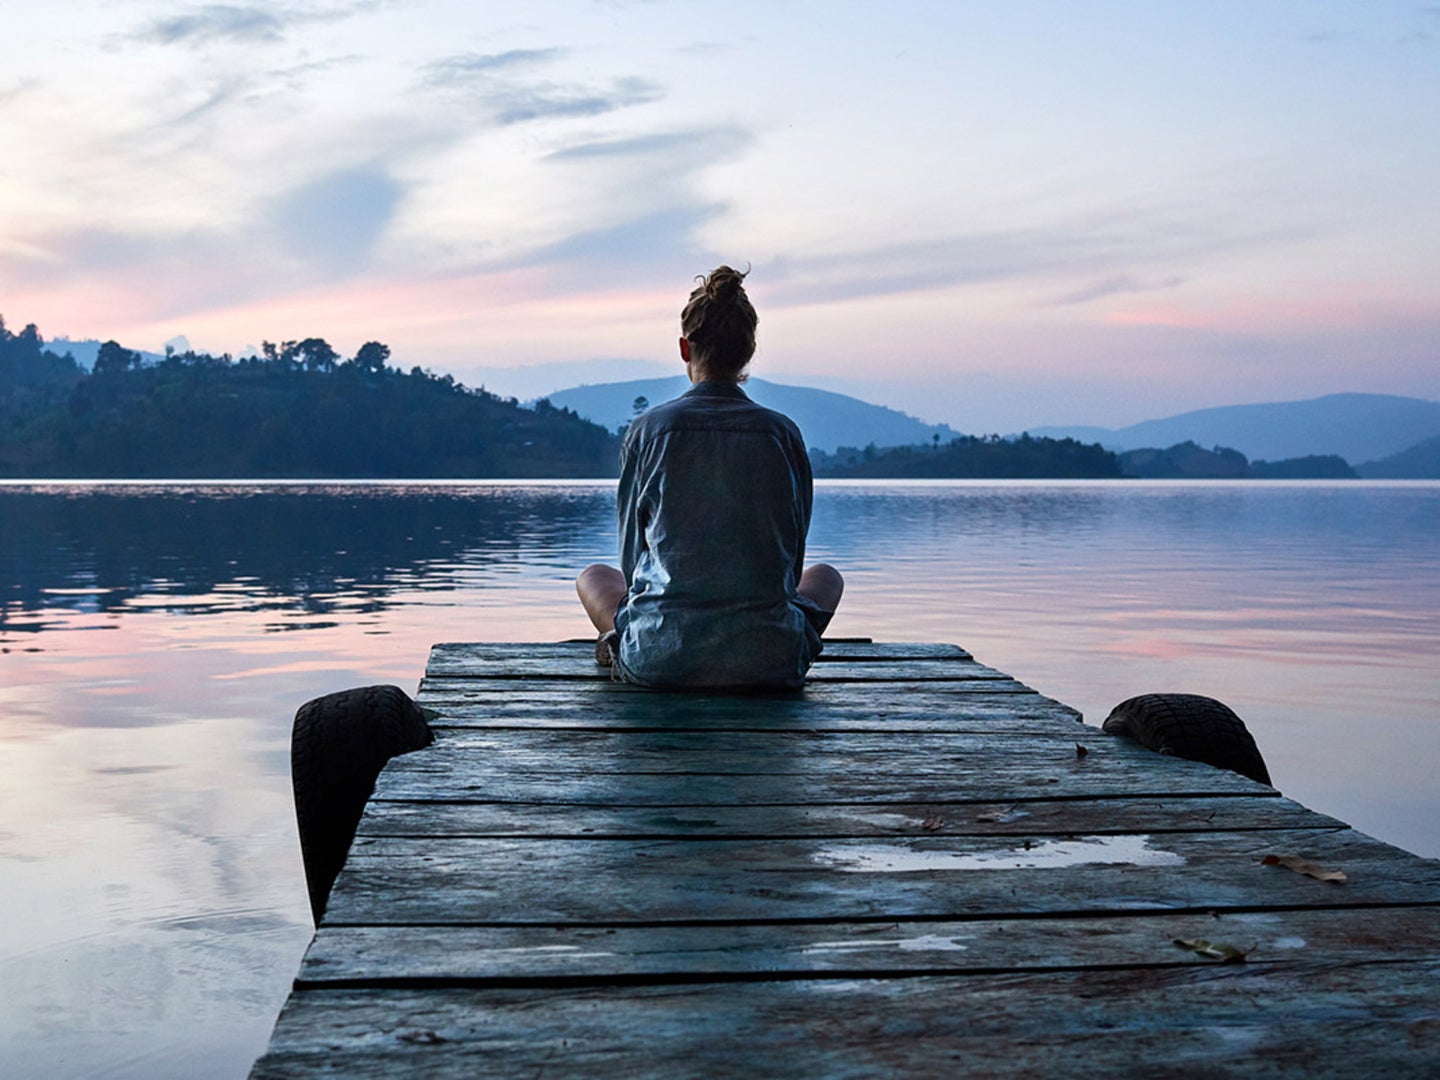 A person practicing mindfulness by meditating on a dock by a lake